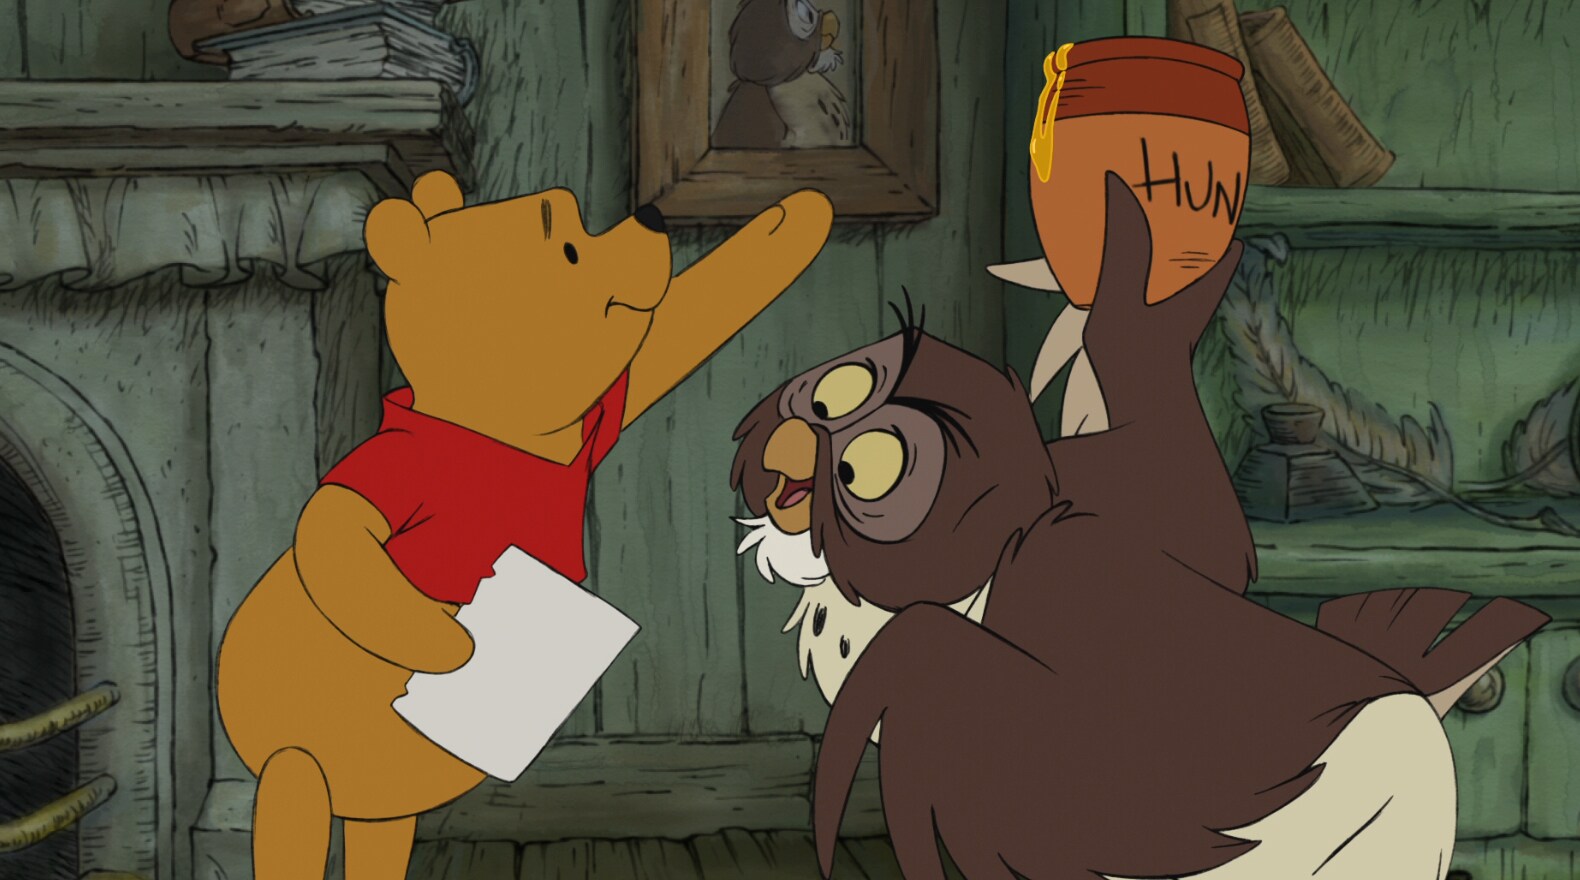 Pooh just needs a little smackerel of Owl’s hunny.